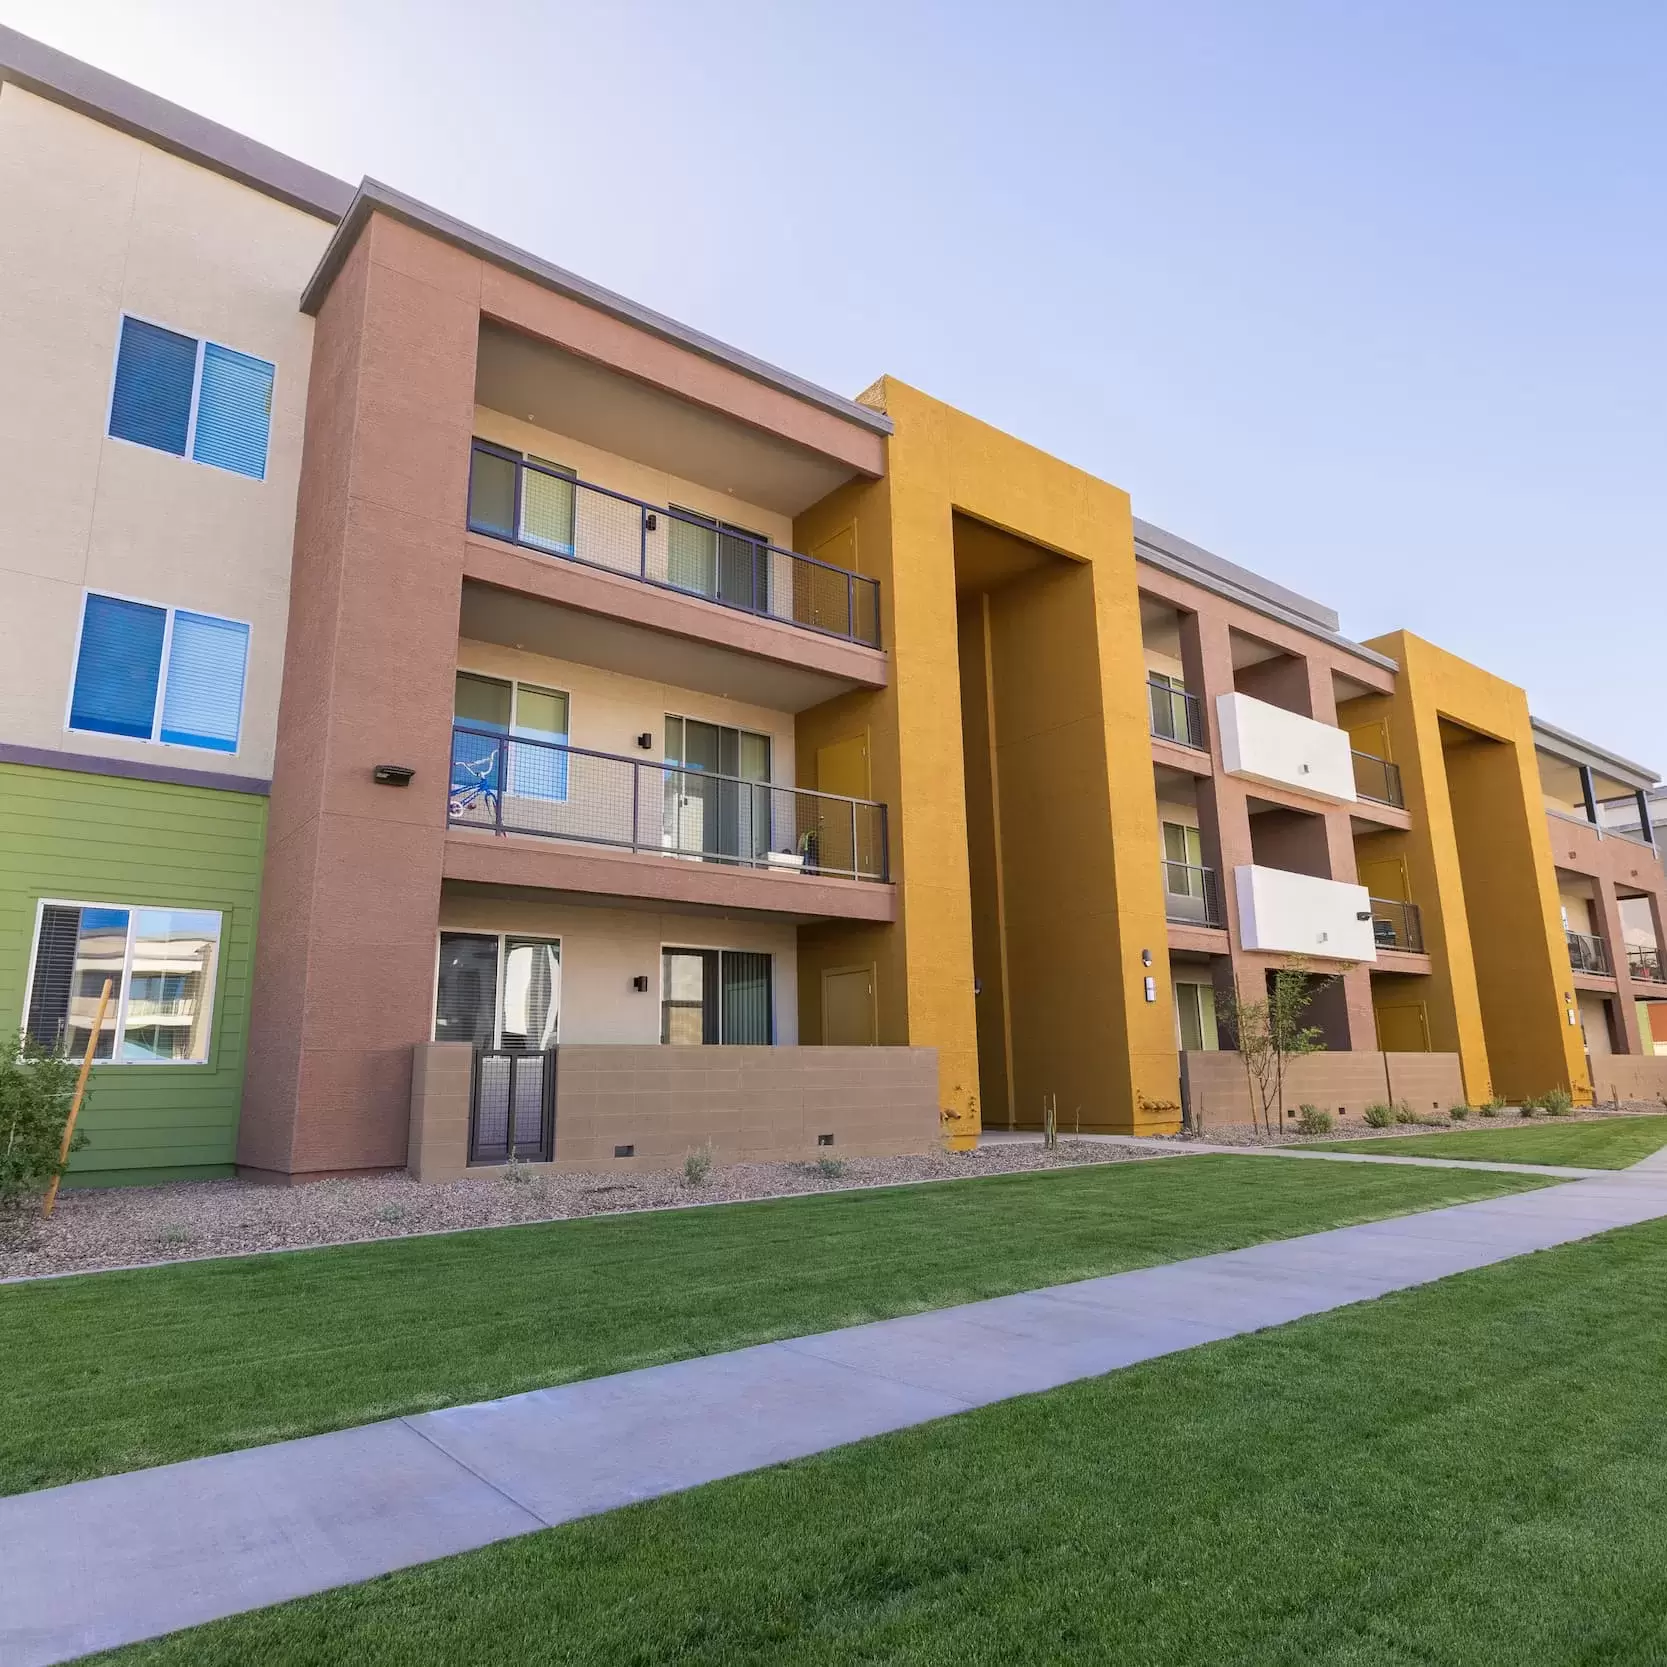 A view of the exterior of Liv Crossroads apartment buildings with a manicured lawn and tidy landscaping.